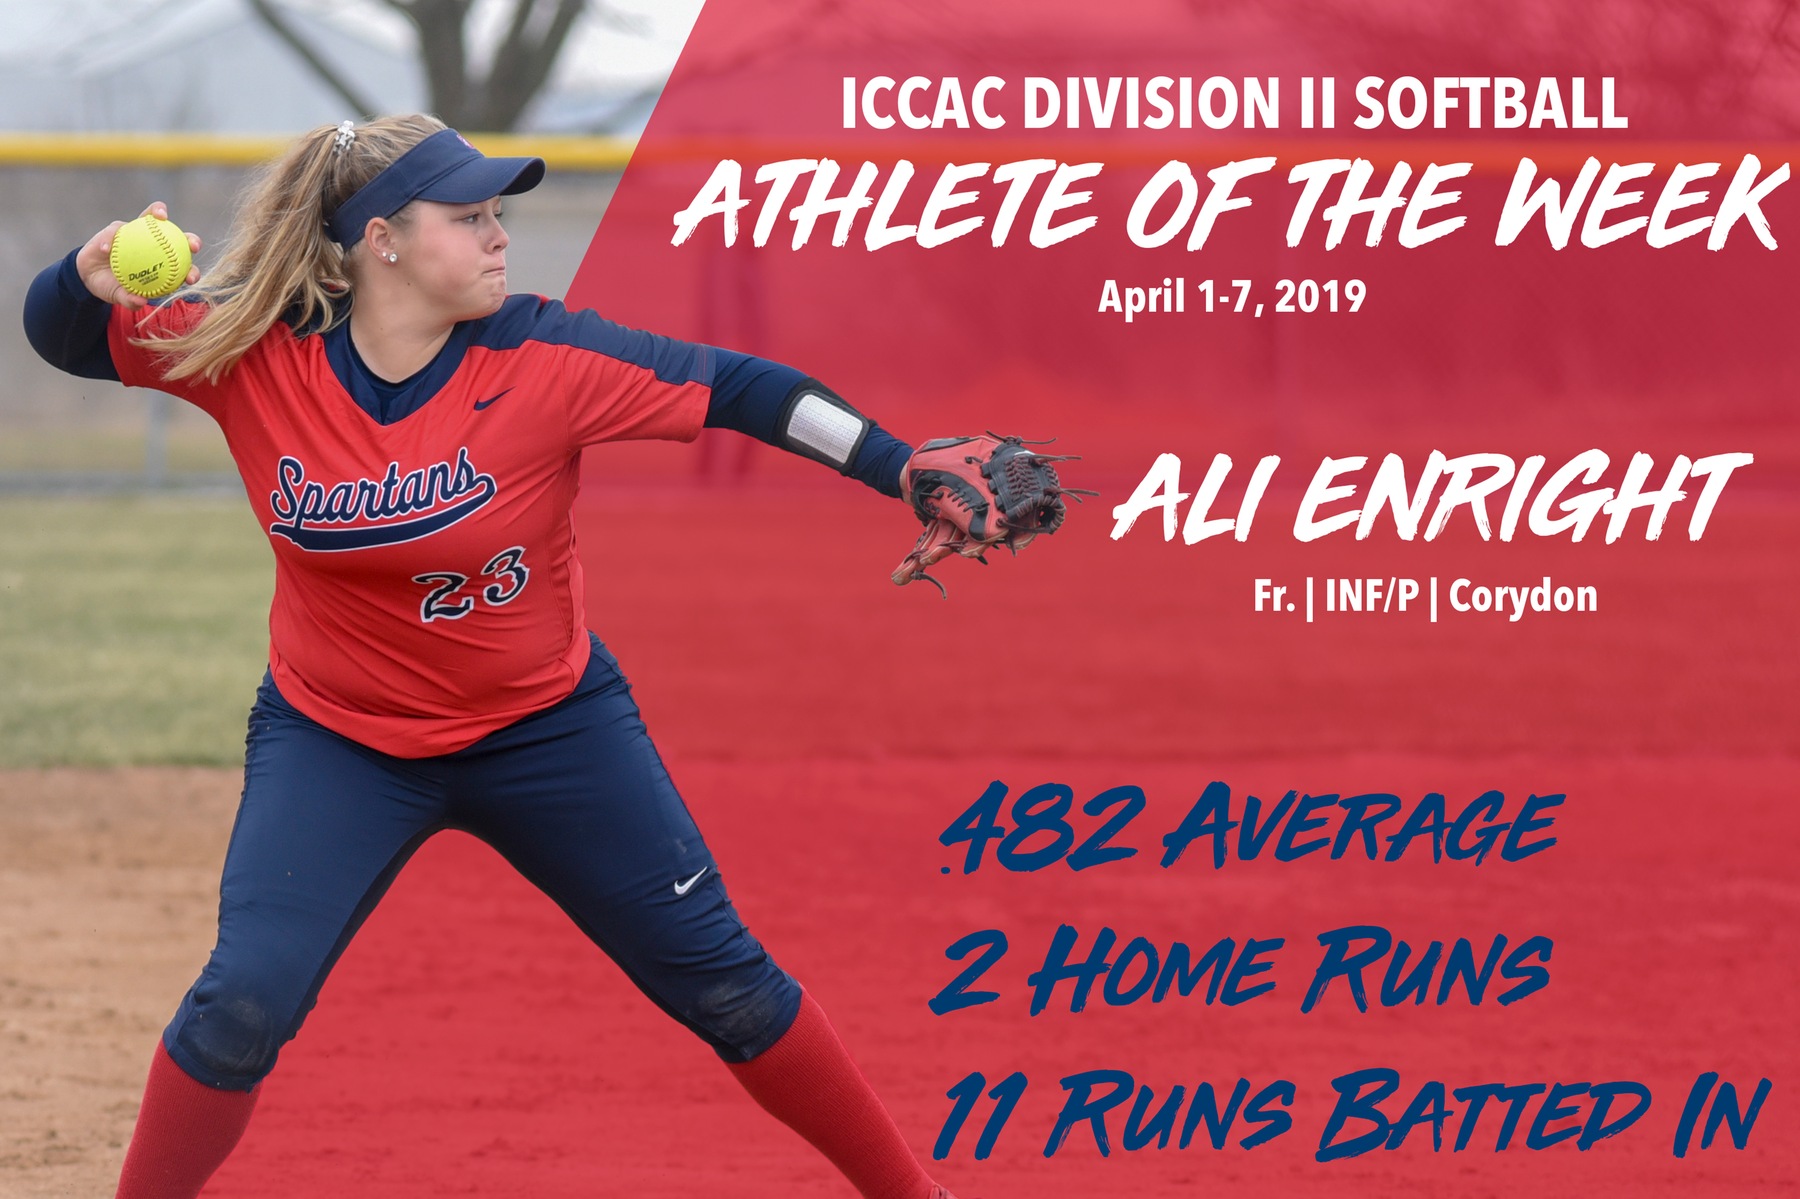 Southwestern freshman Ali Enright was named the ICCAC Division II Softball Athlete of the Week for the week of April 1-7.